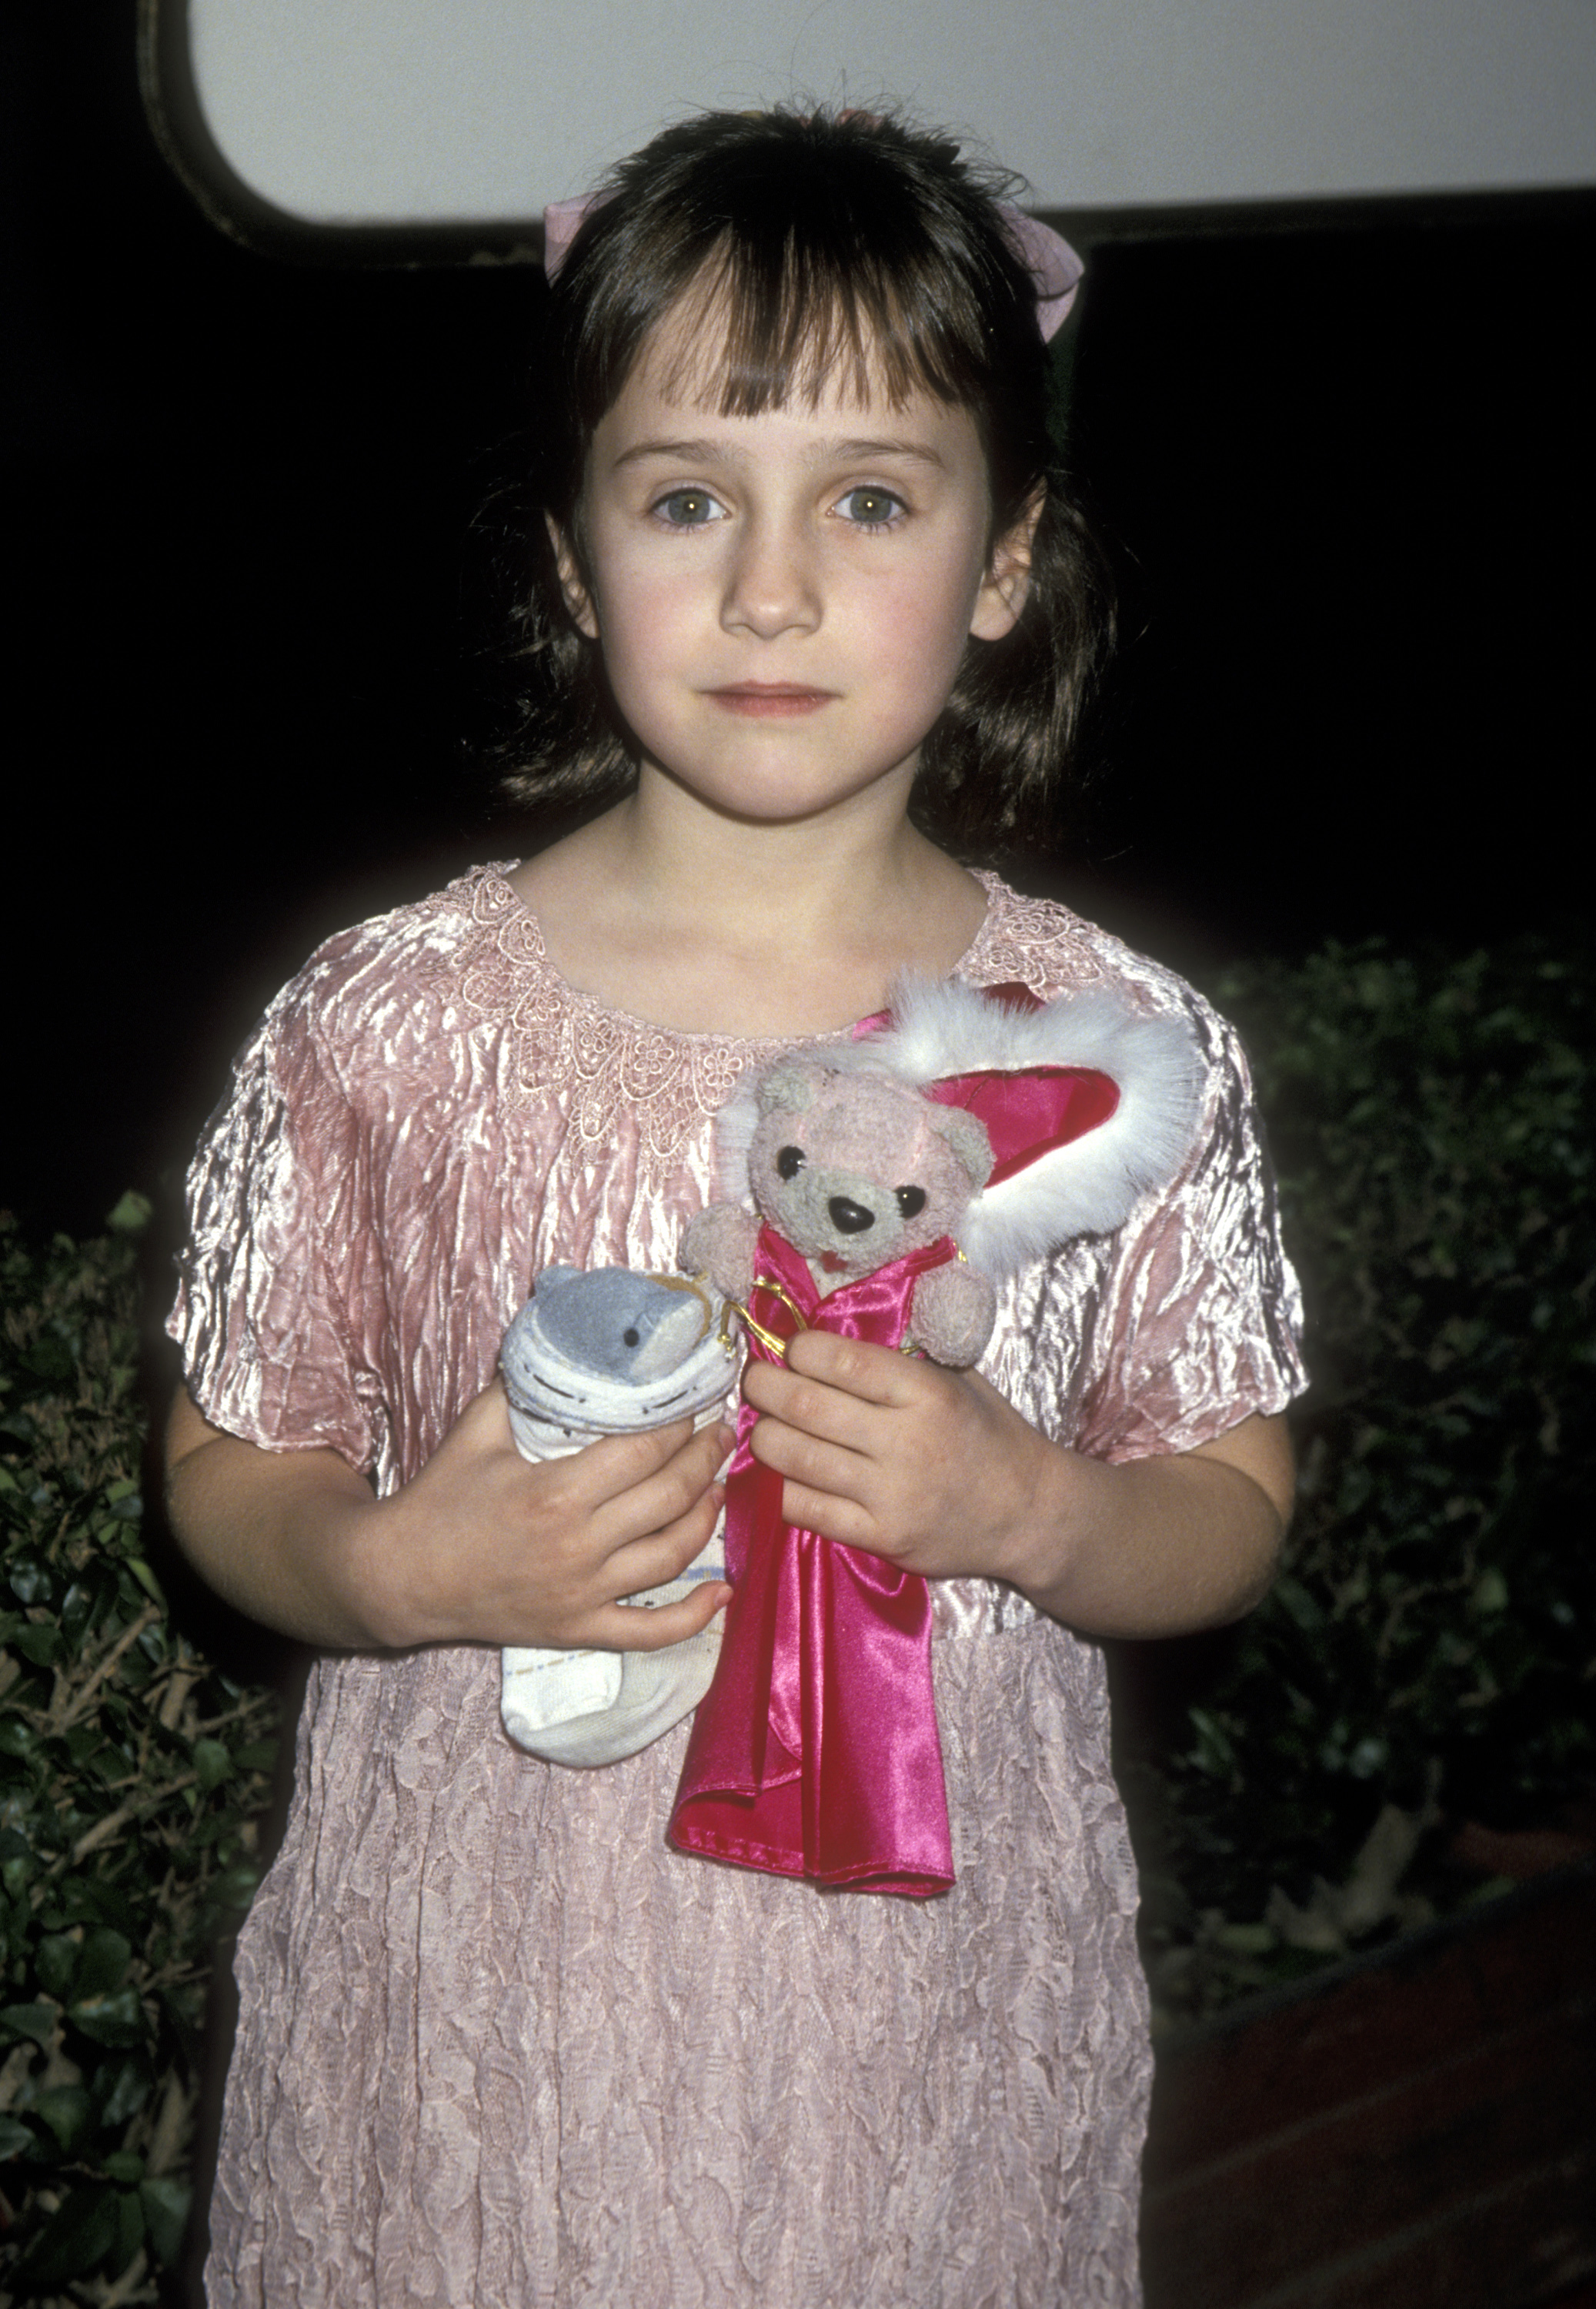 Mara Wilson attends the 52nd Annual Golden Globe Awards at Beverly Hilton Hotel on January 21, 1995 in Beverly Hills, California. | Source: Getty Images